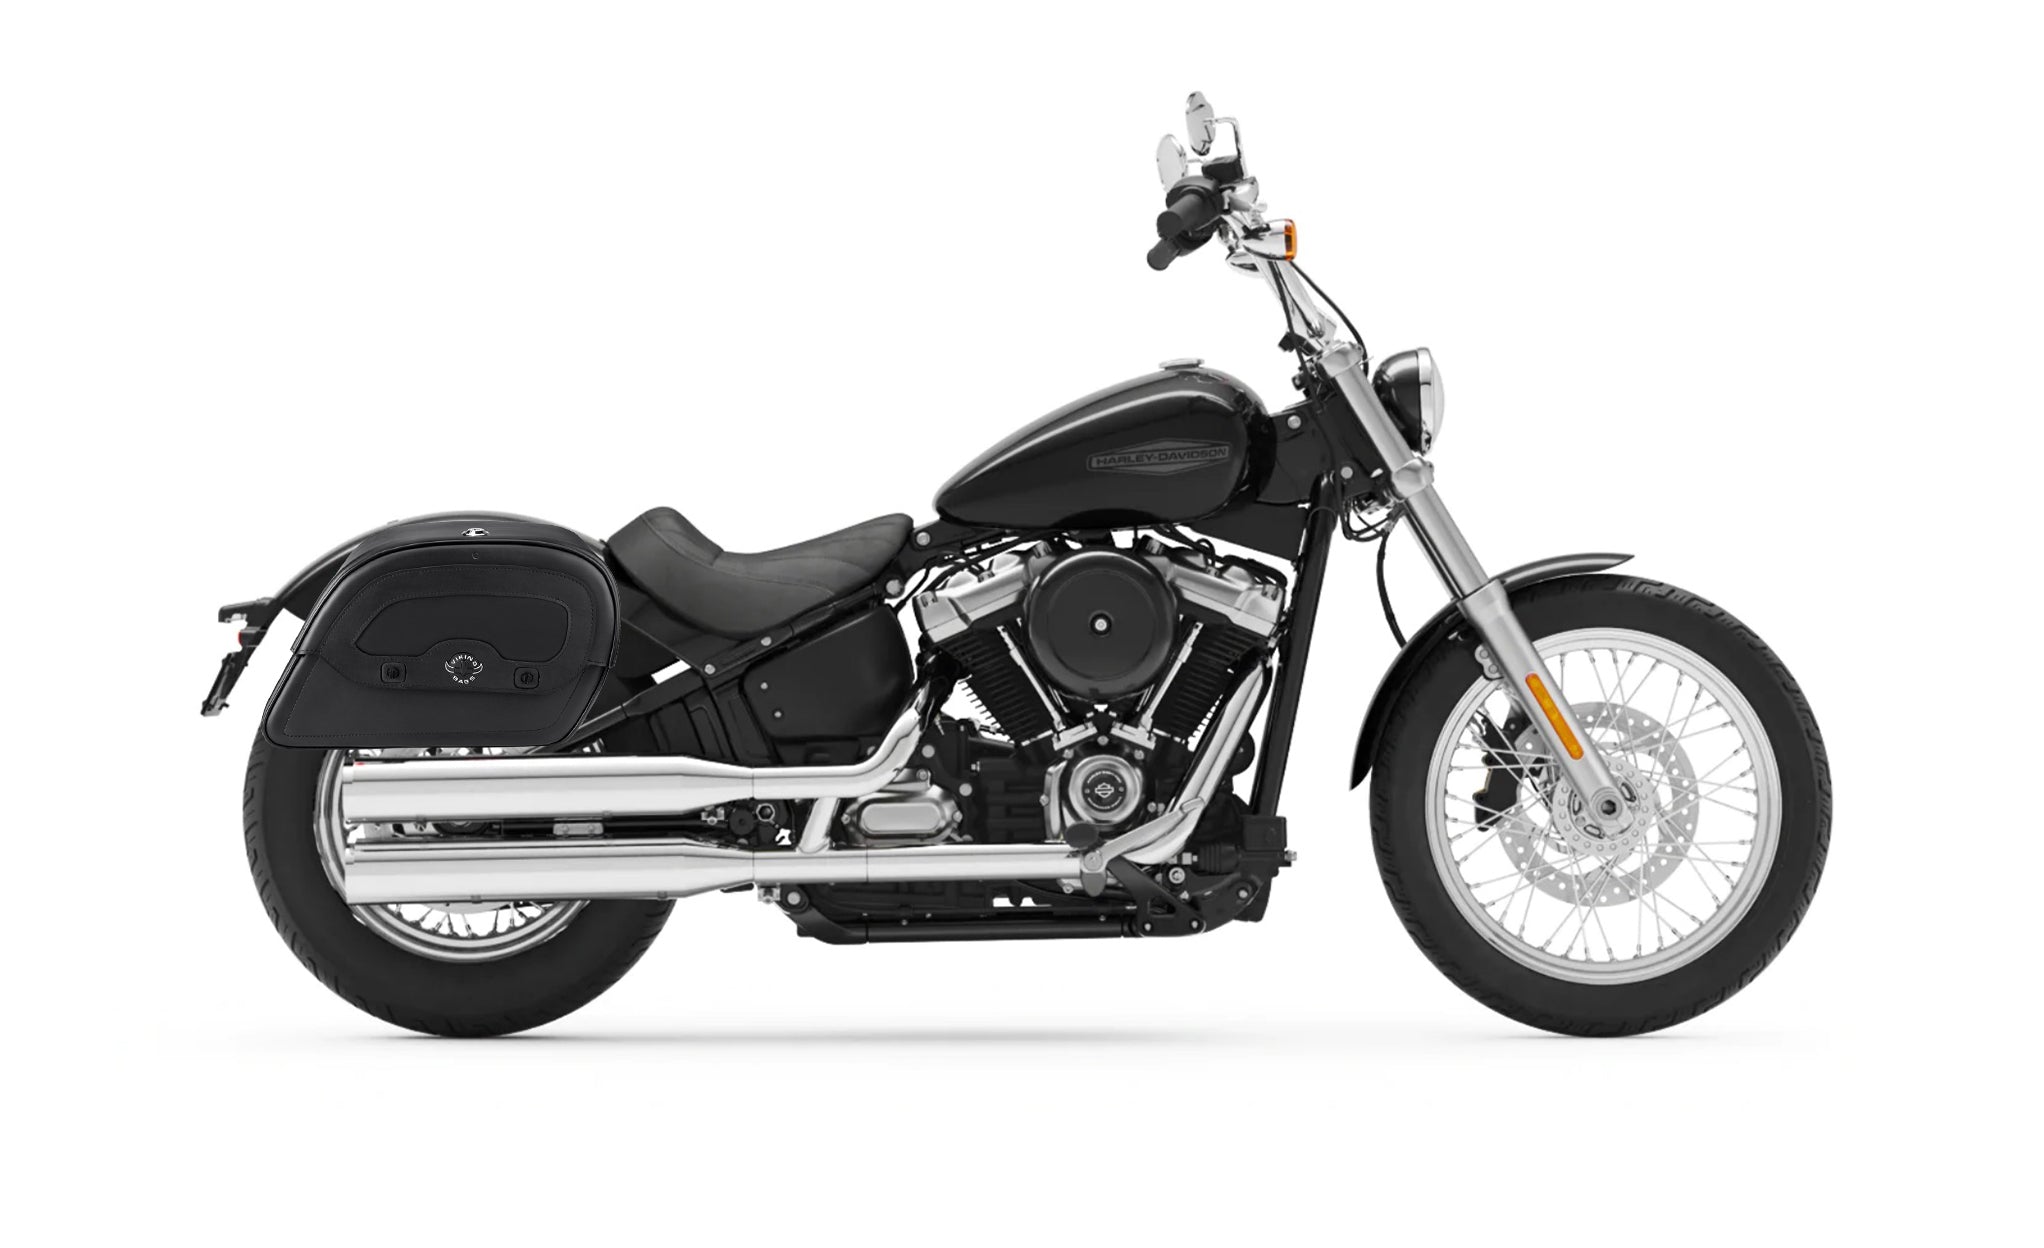 28L - Warrior Medium Quick-Mount Motorcycle Saddlebags For Harley Softail Standard FXST @expand